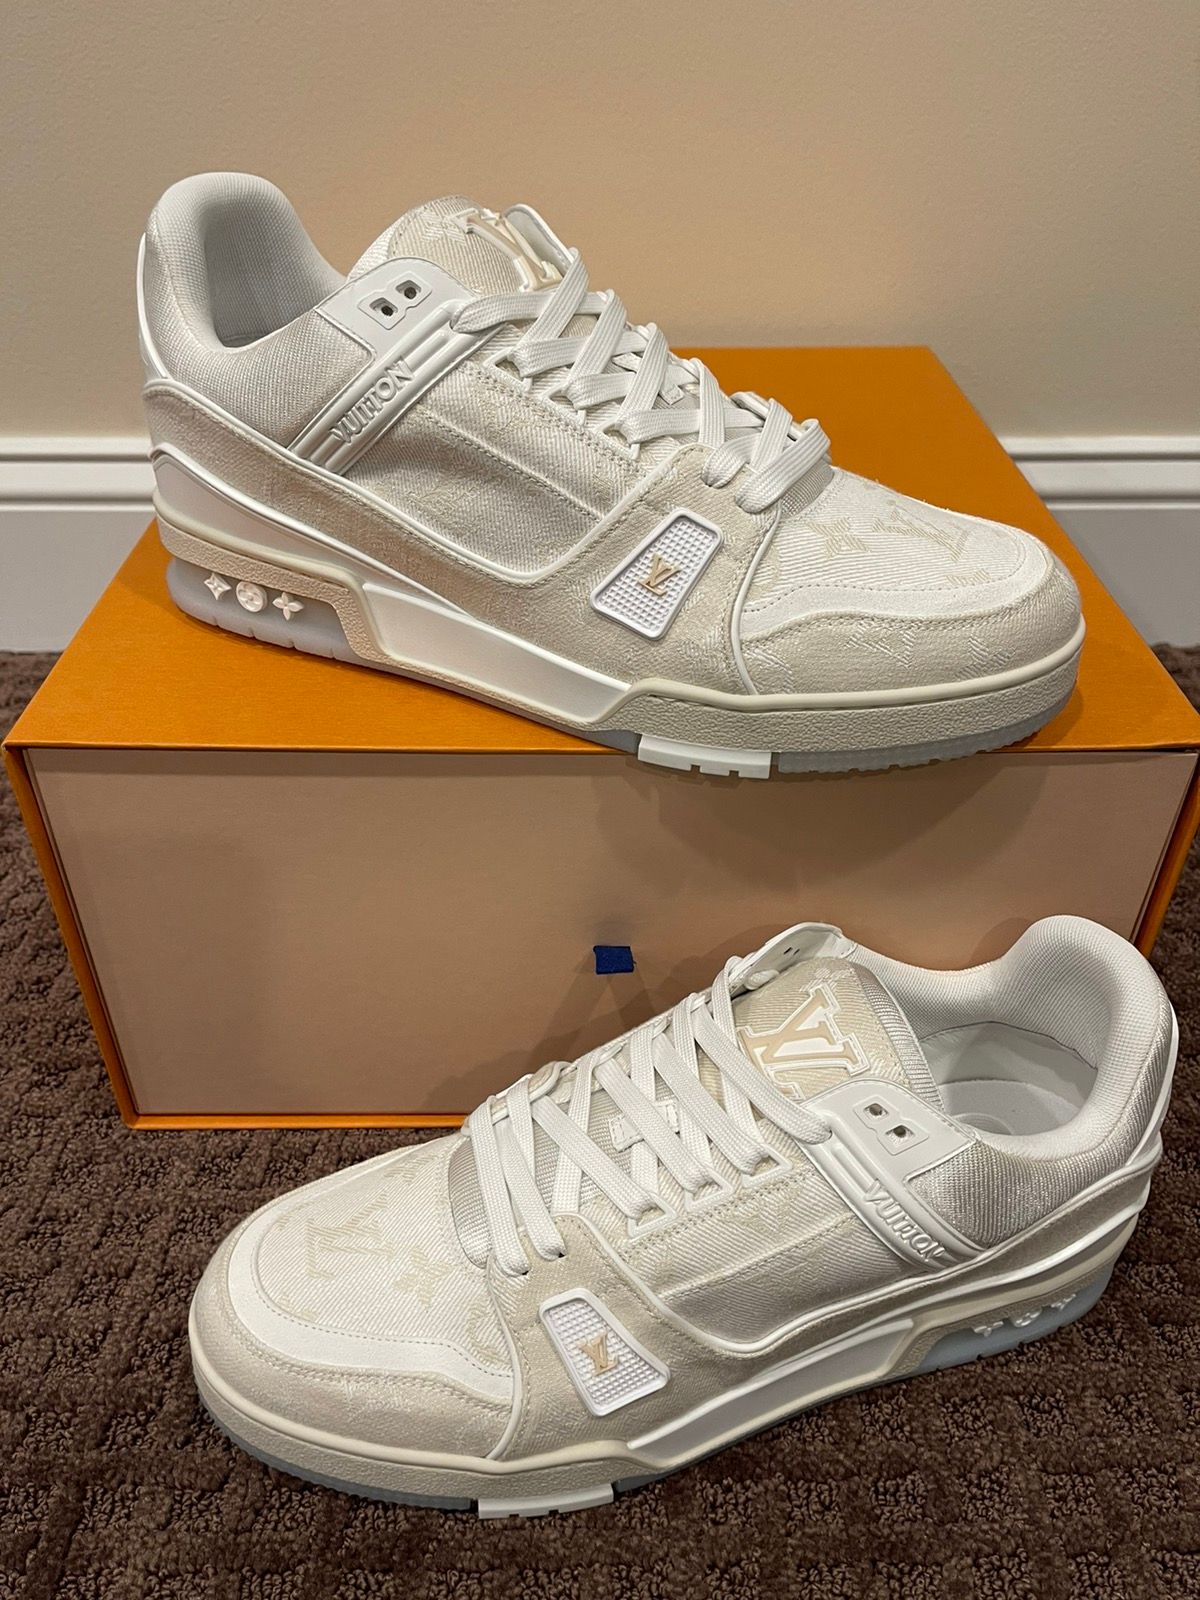 NWT Louis Vuitton White Beige Trainer Sneakers with Strap 9 US 8